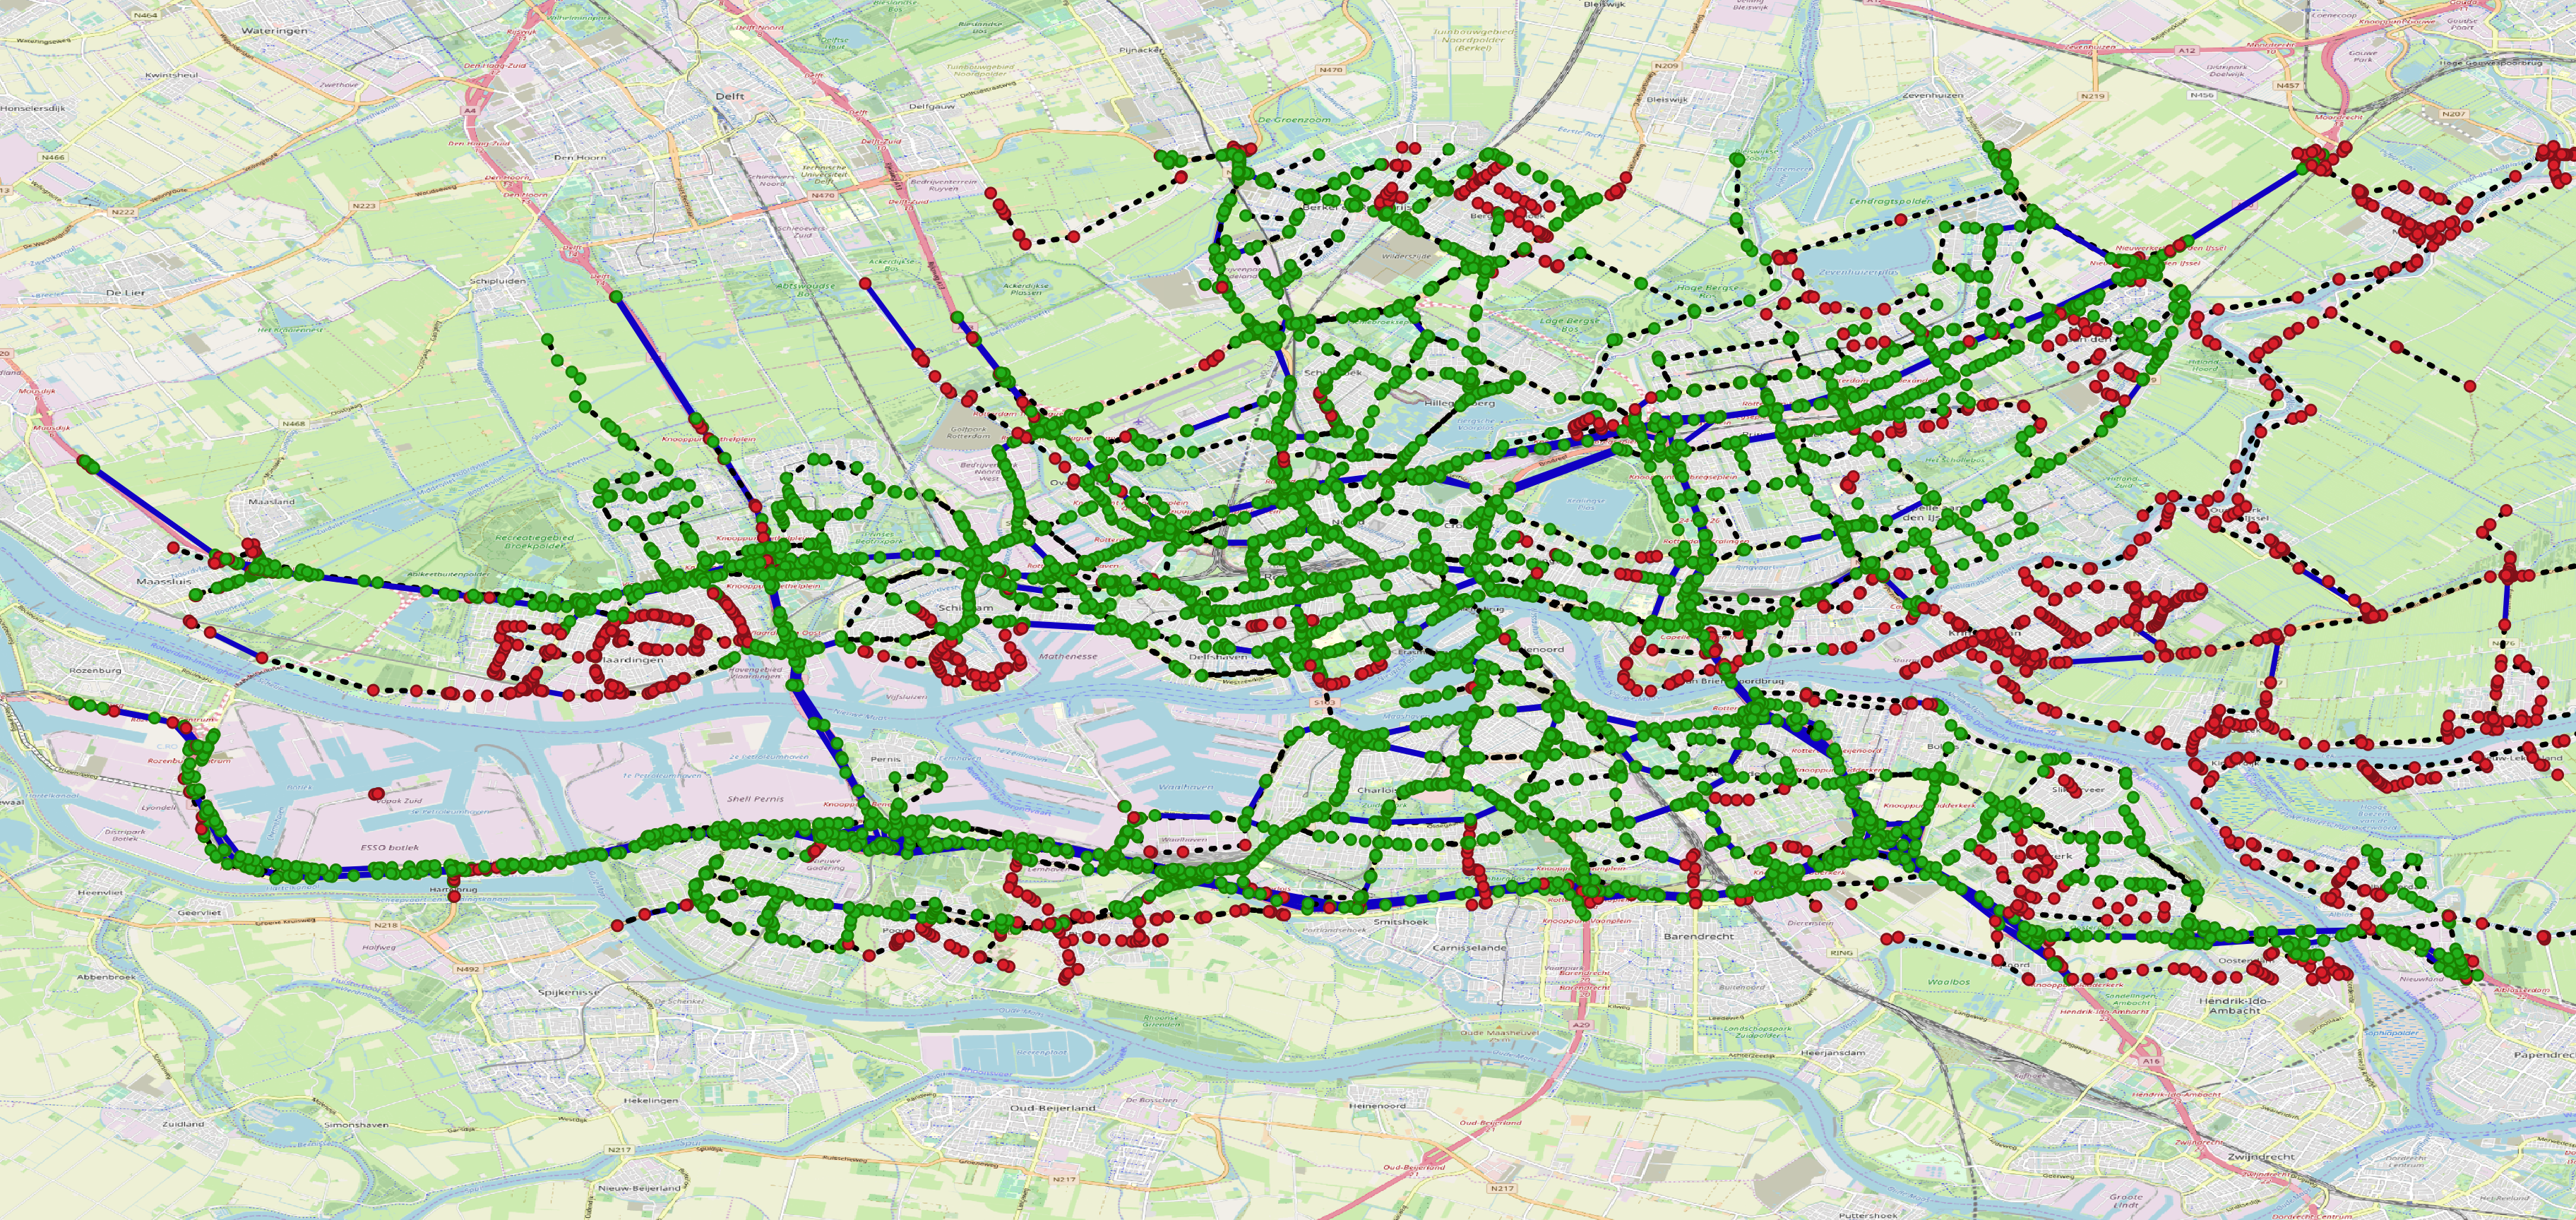 File:Disconnected road network 2.png